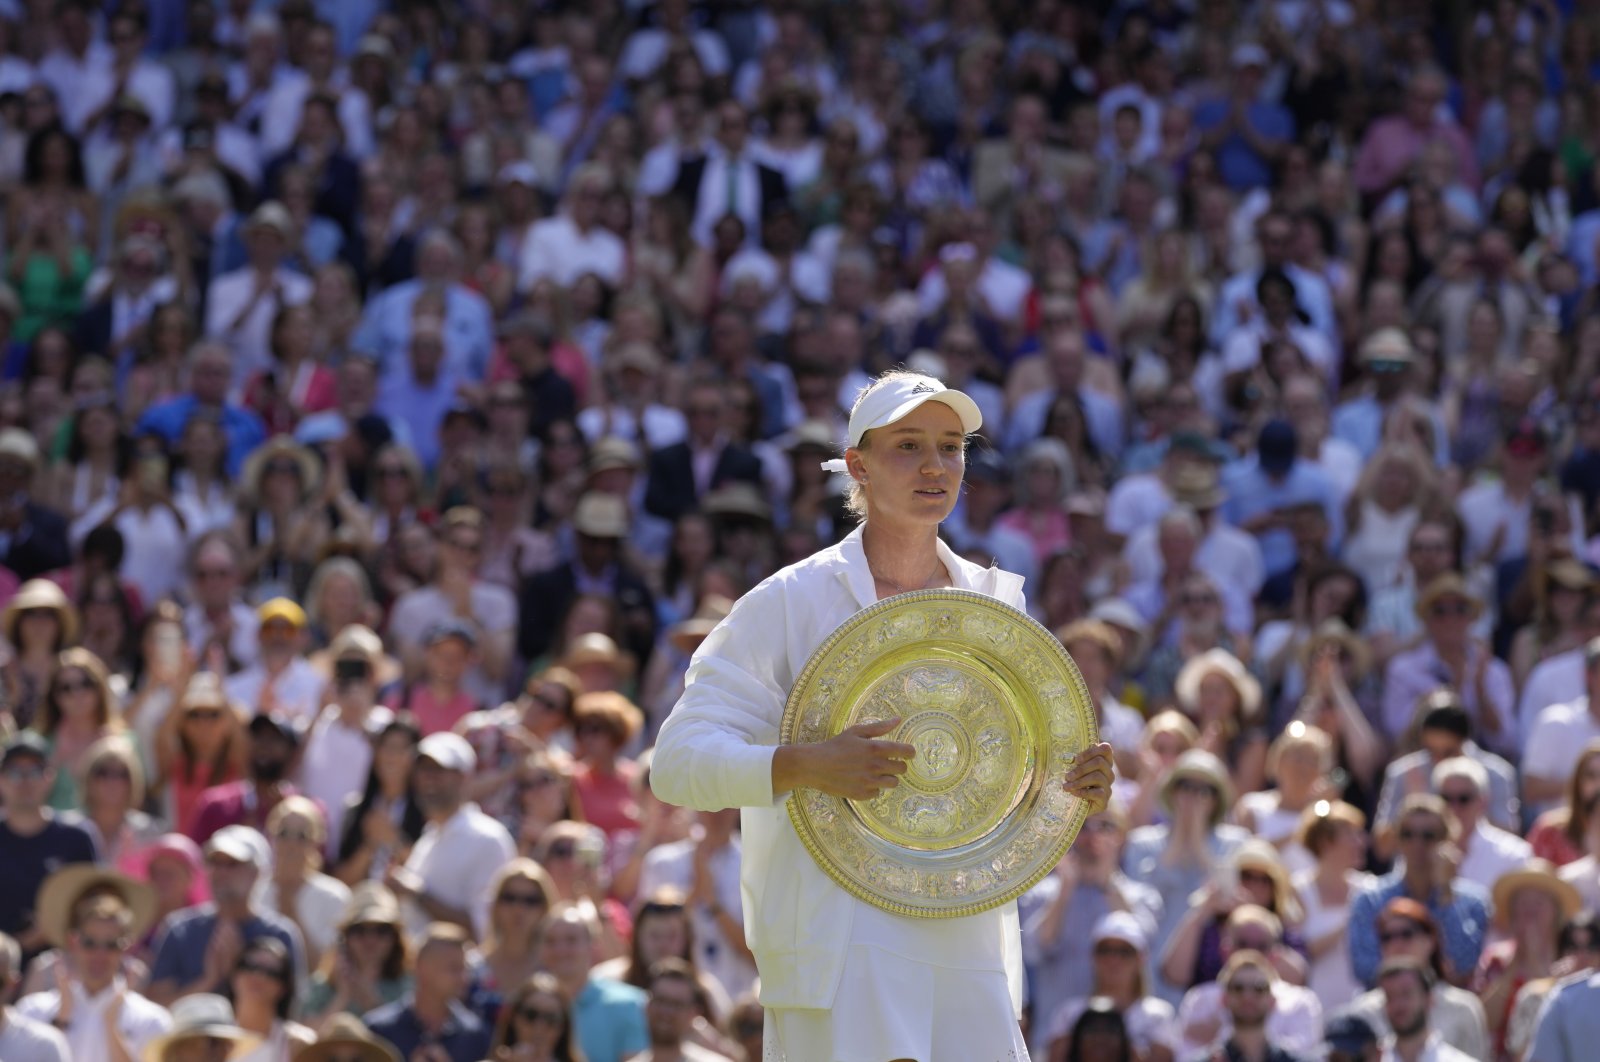 Kazakhstan&#039;s Elena Rybakina holds the trophy as she celebrates after beating Tunisia&#039;s Ons Jabeur to win the final of the women&#039;s singles on Day 13 of the Wimbledon tennis championships in London, U.K., July 9, 2022. (AP Photo)